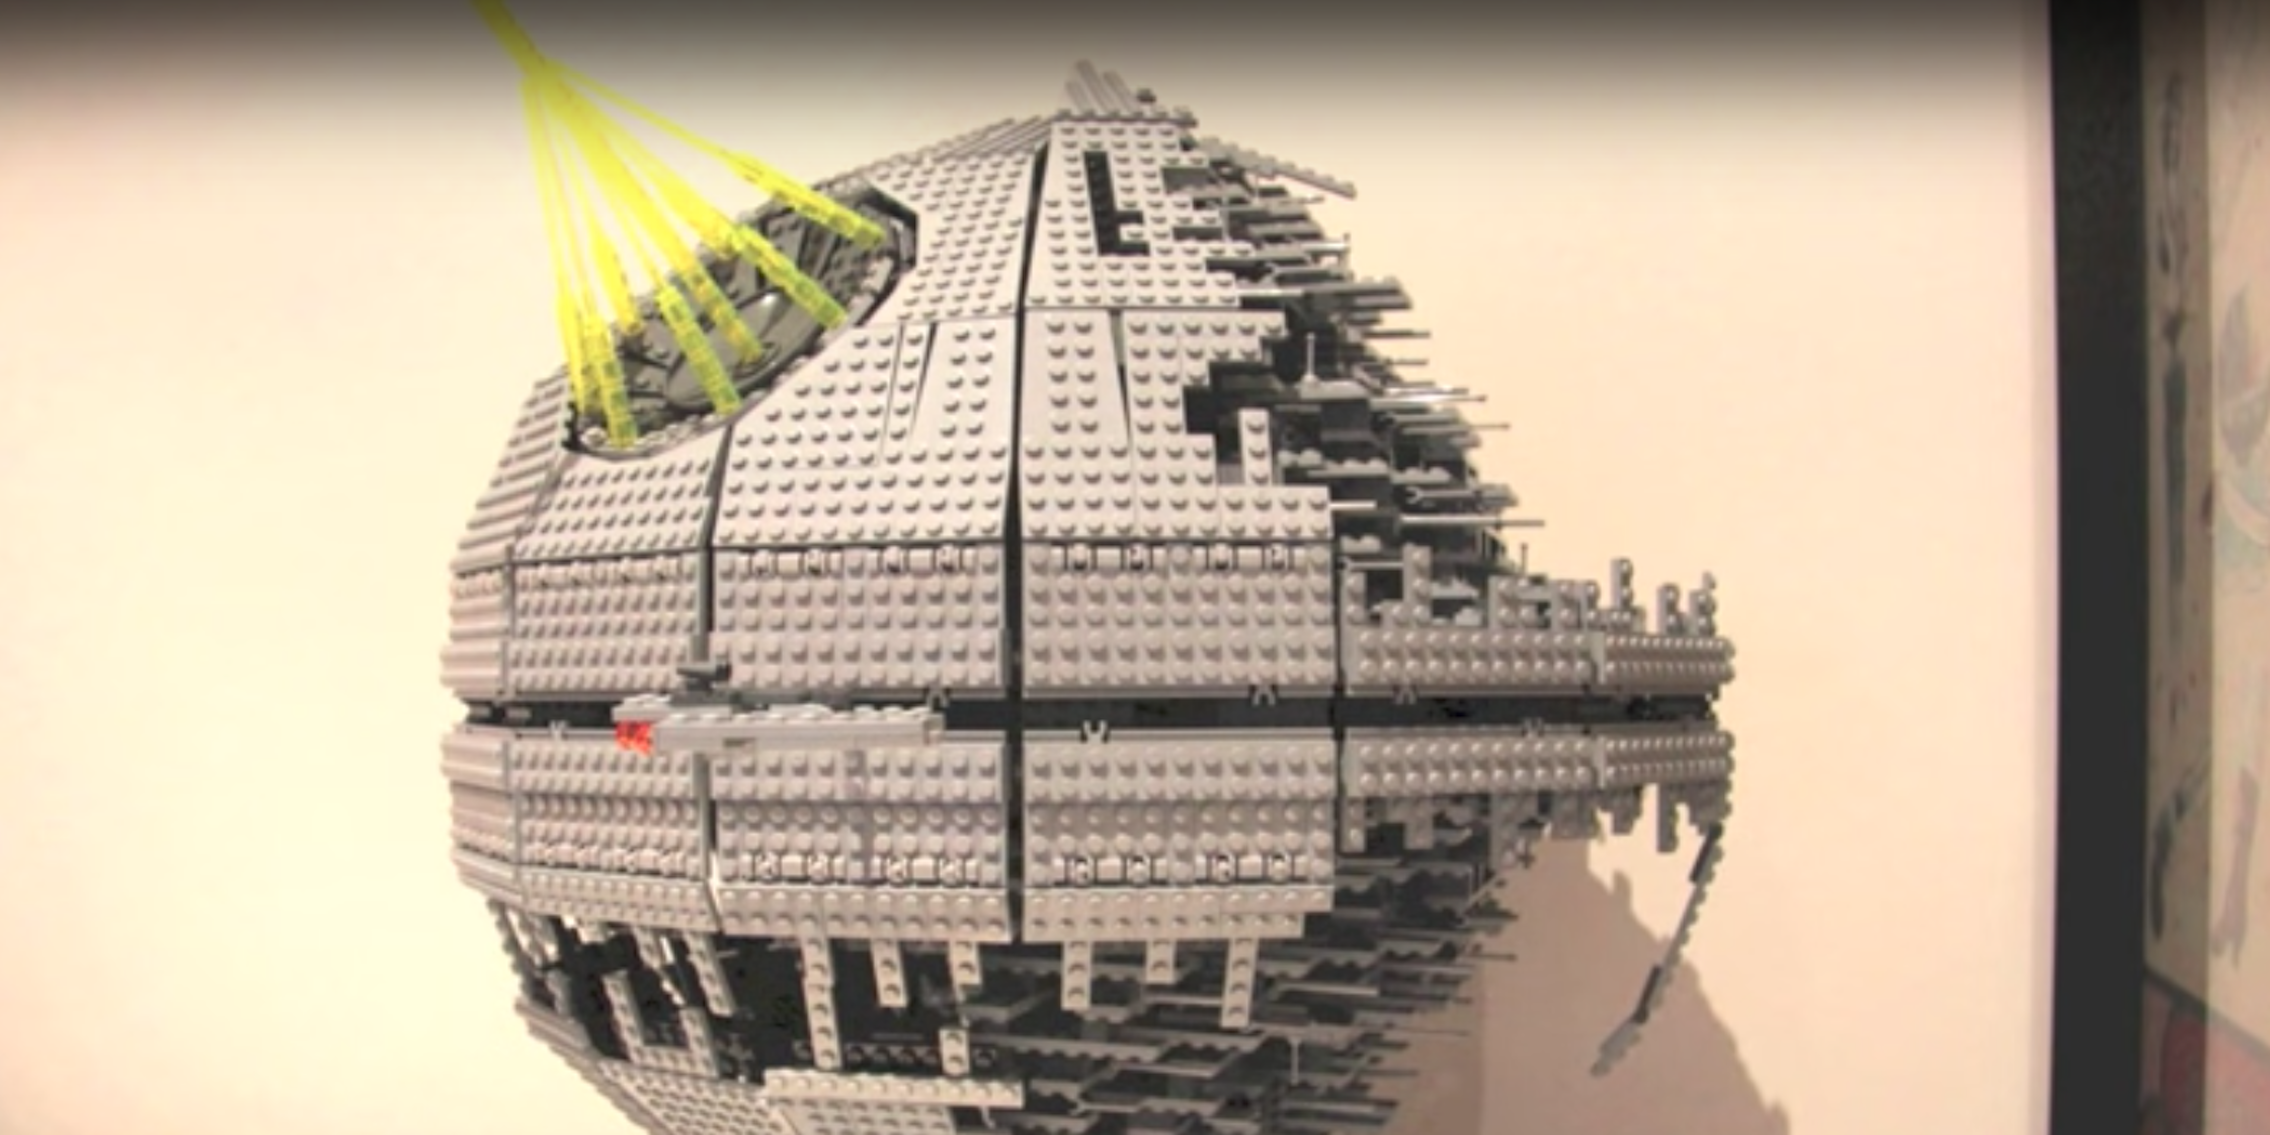 most expensive lego : death star